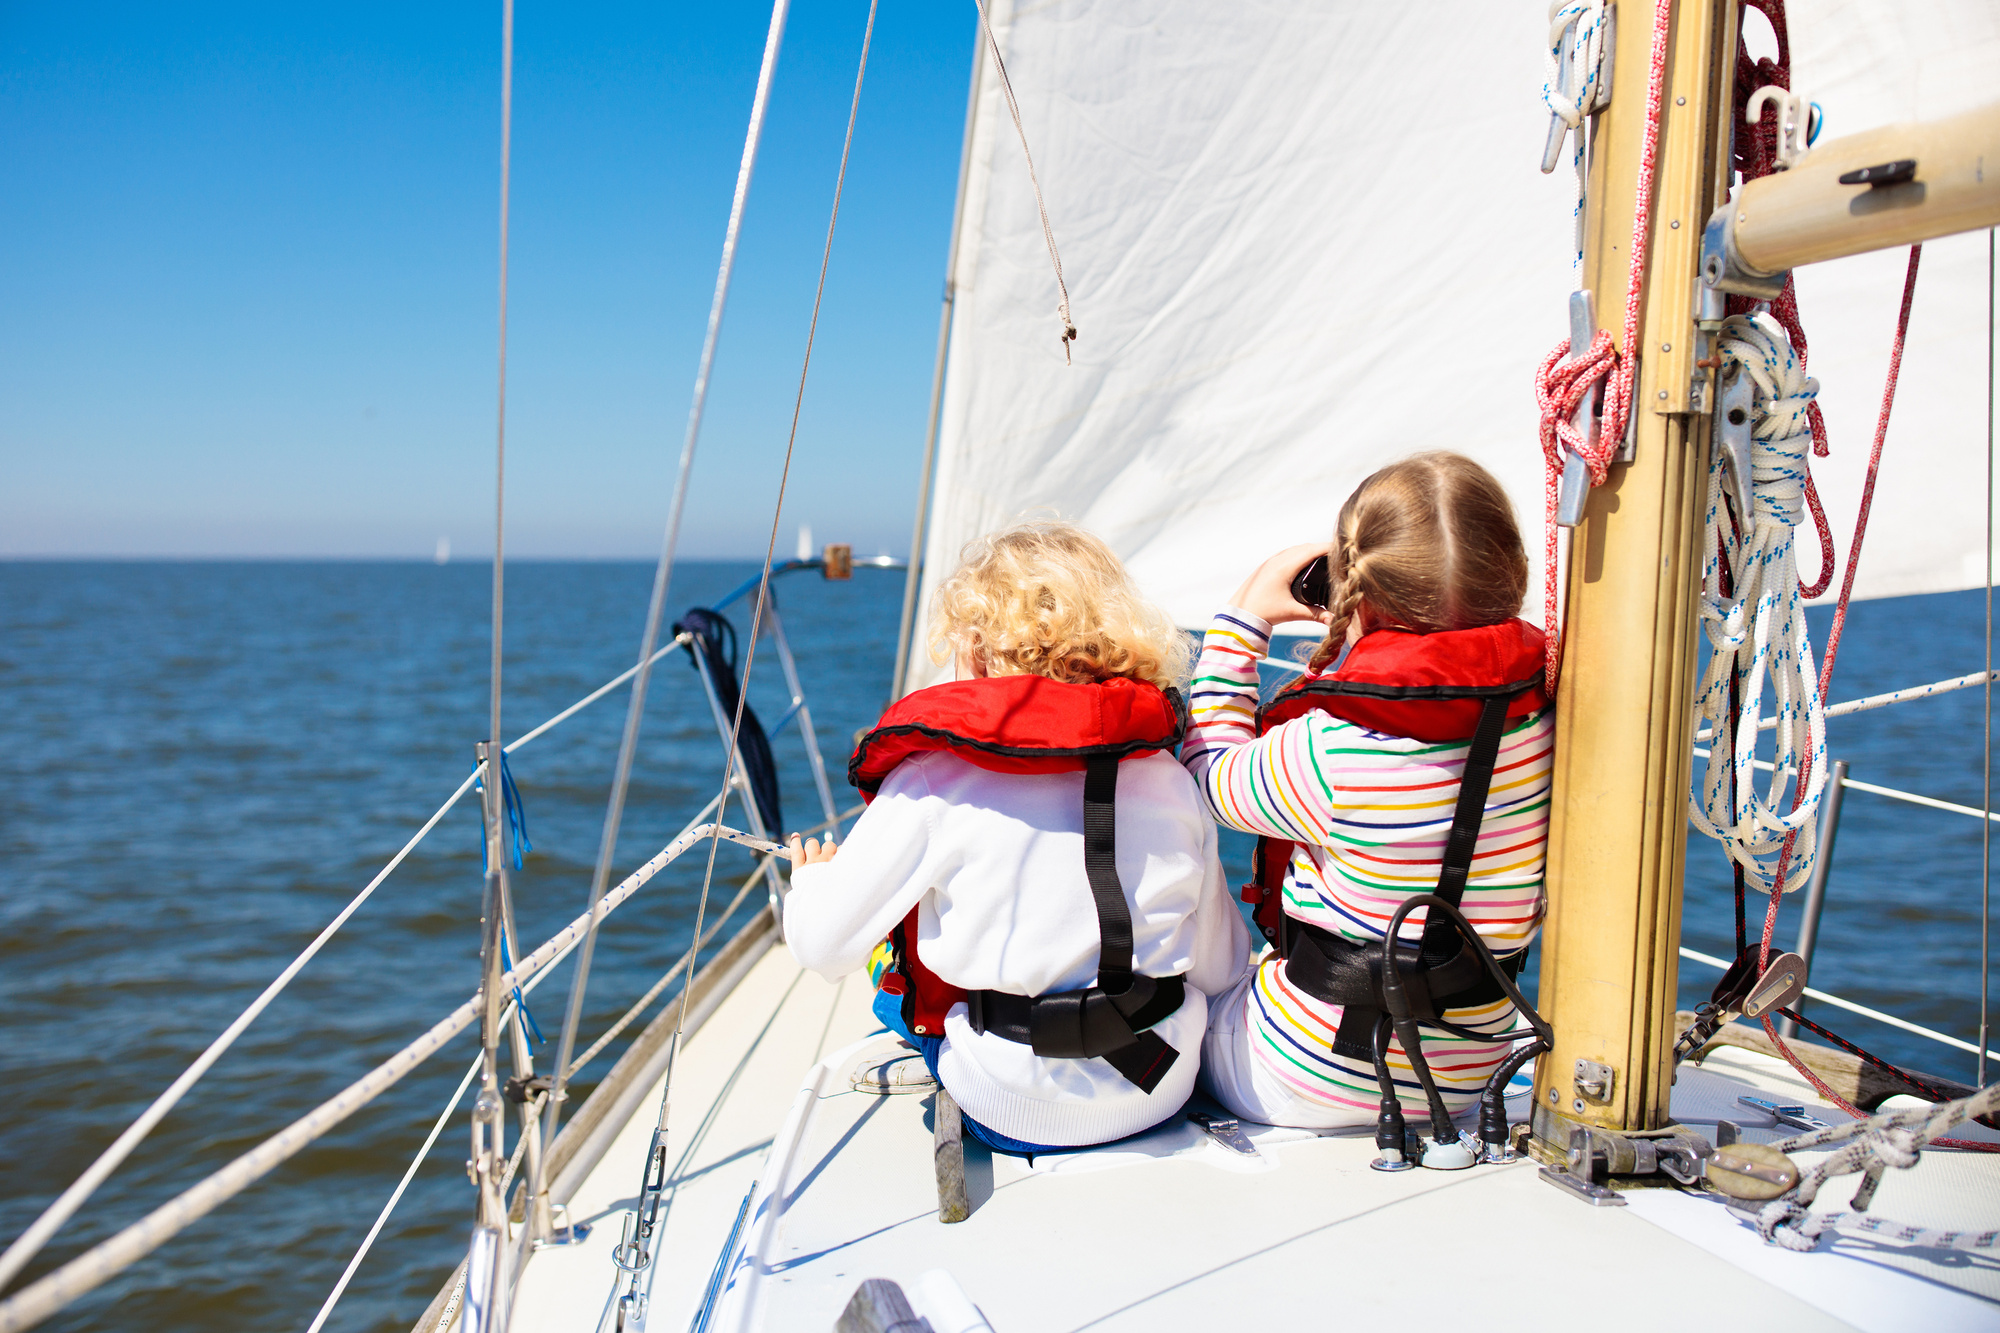 Kids sail on yacht in sea. Child sailing on boat.